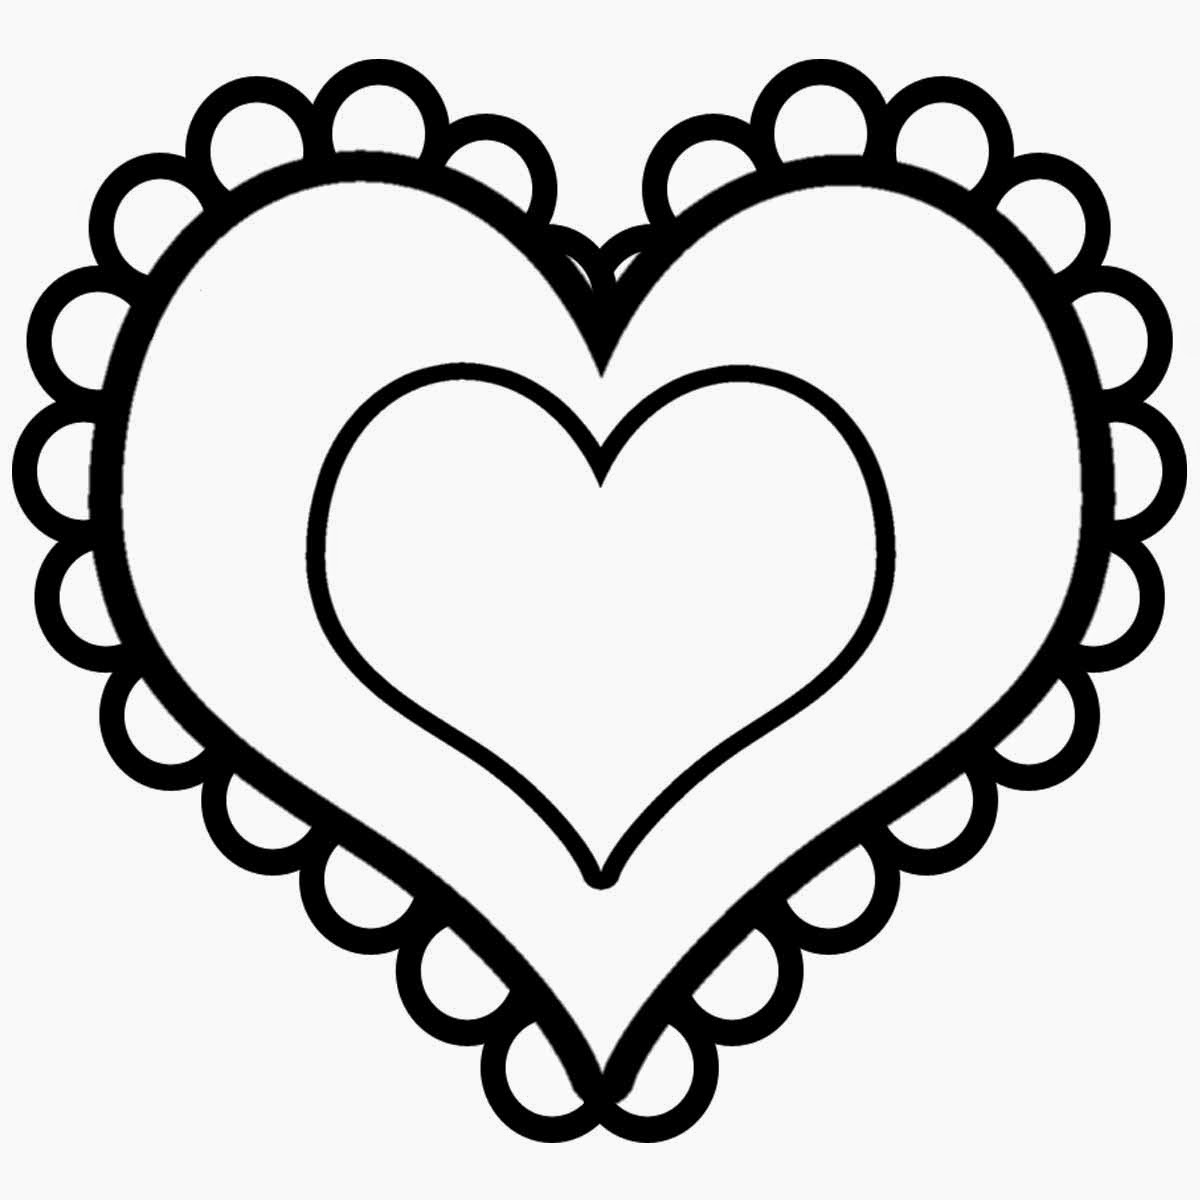 Coloring Pages Hearts Free Printable Coloring Pages For Valentine s Day